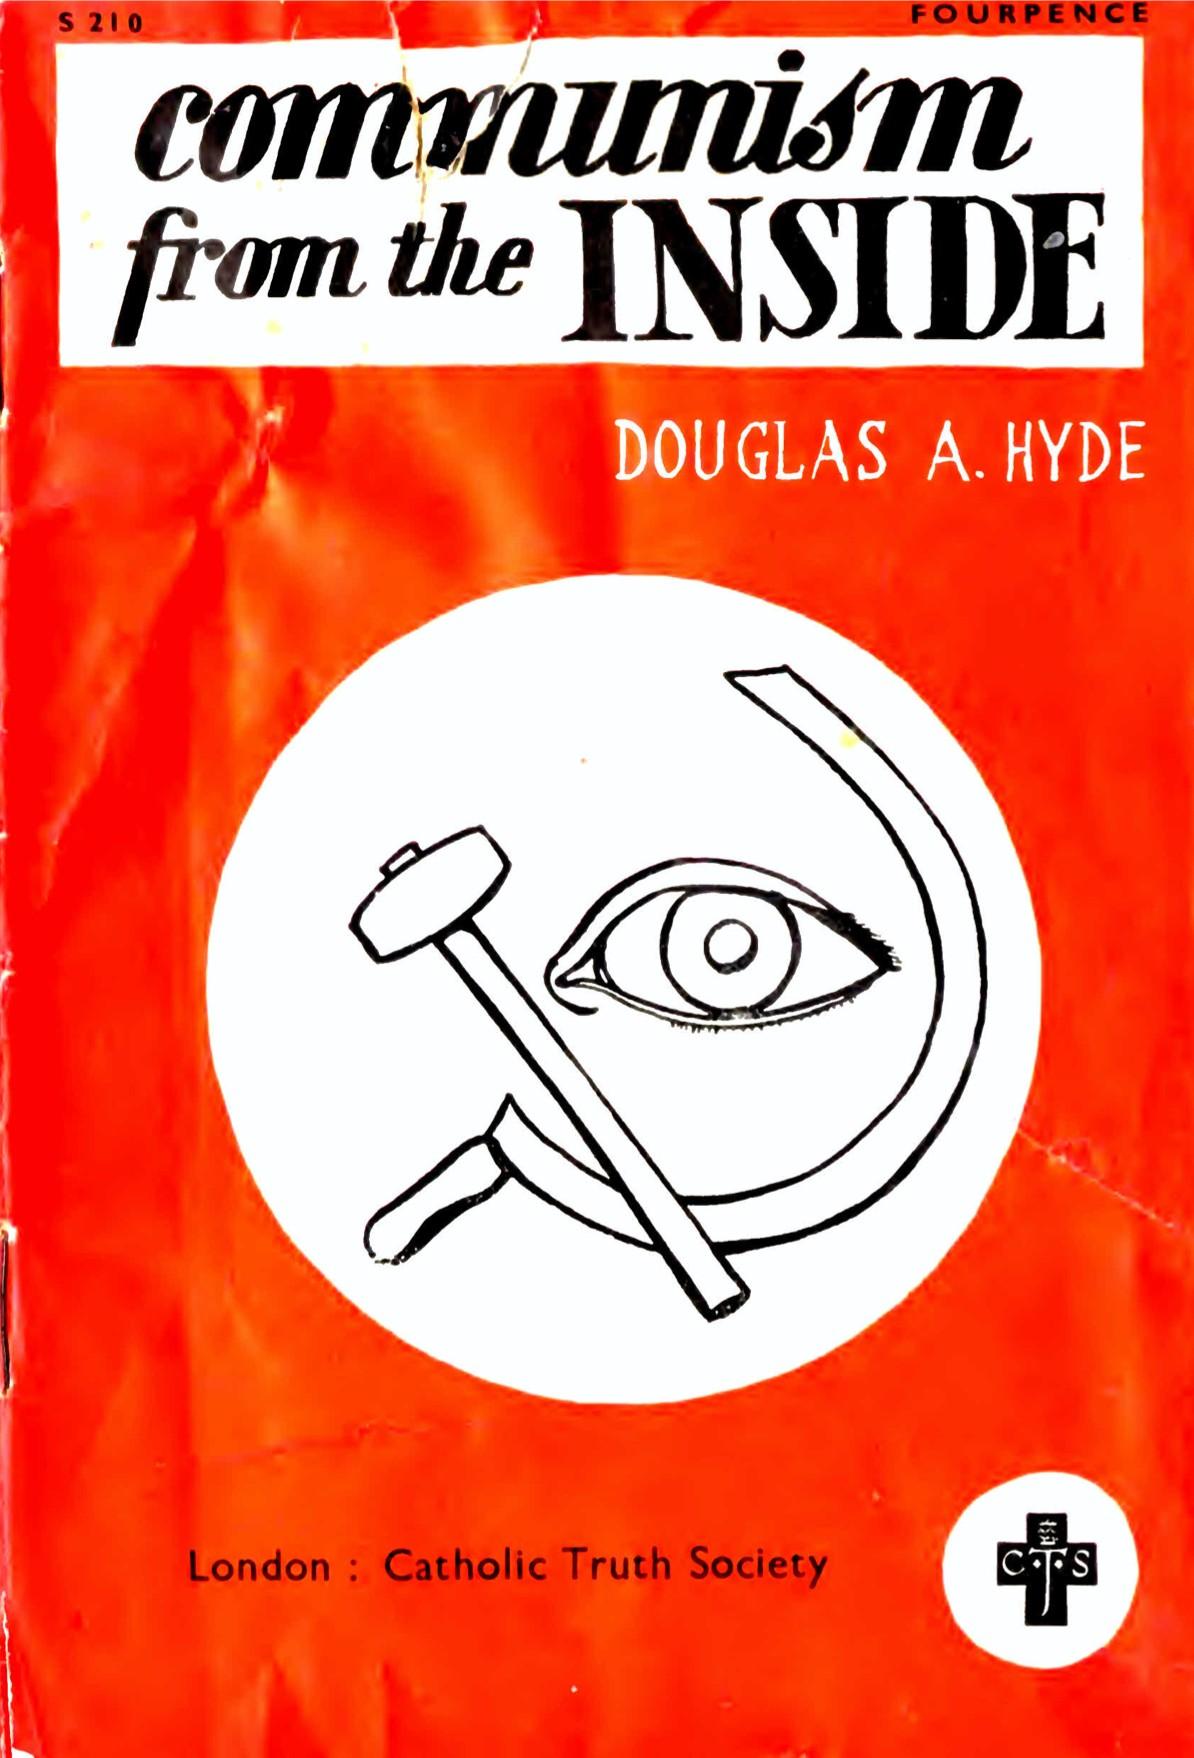 Communism from the Inside (1948) by Douglas A. Hyde